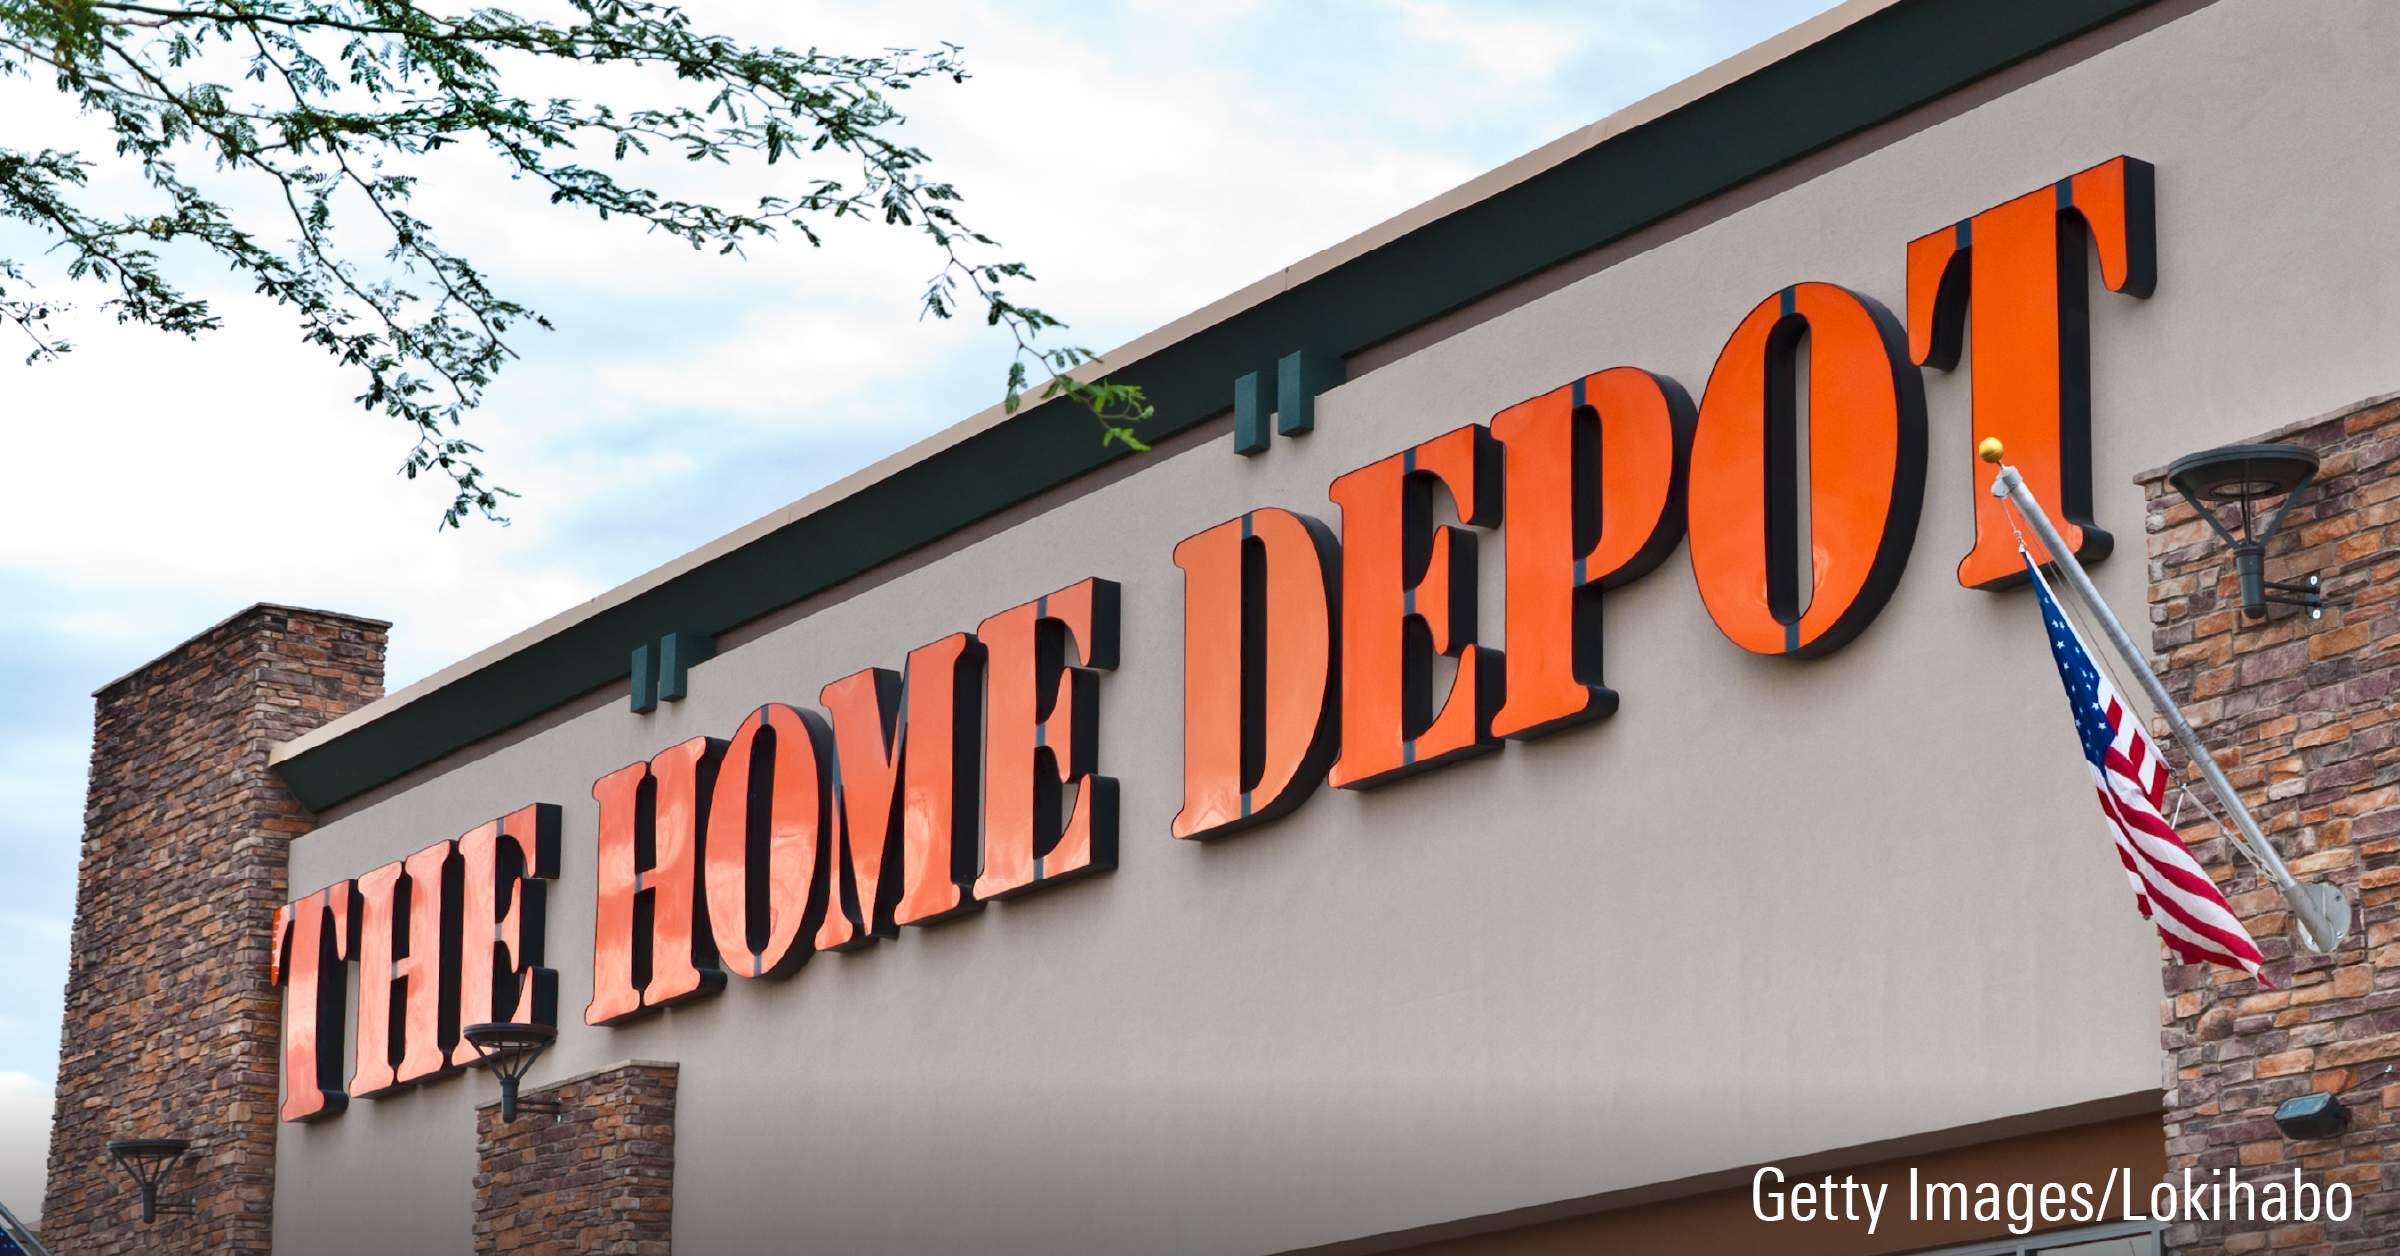 Inside View of a Home Depot Retail Store Editorial Stock Image